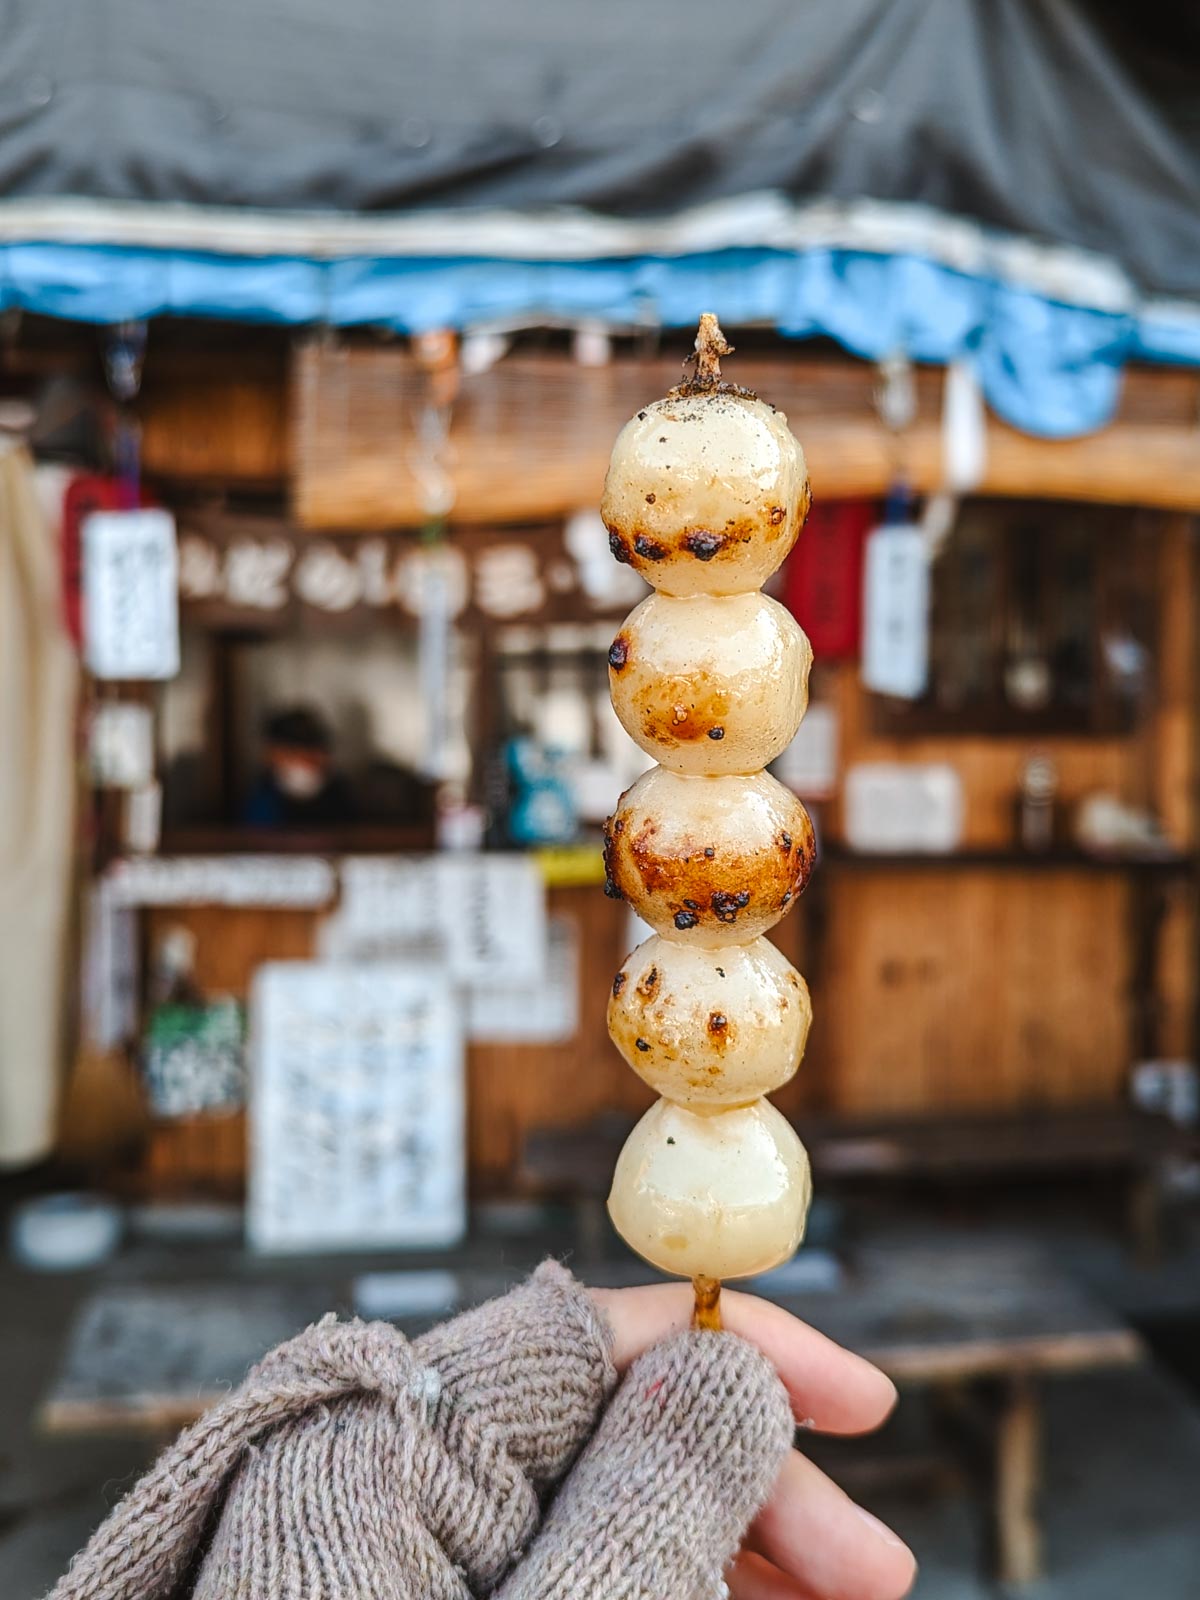 Close up view of hand holding skewer of mitarashi dango, round rice balls with brown syrup.